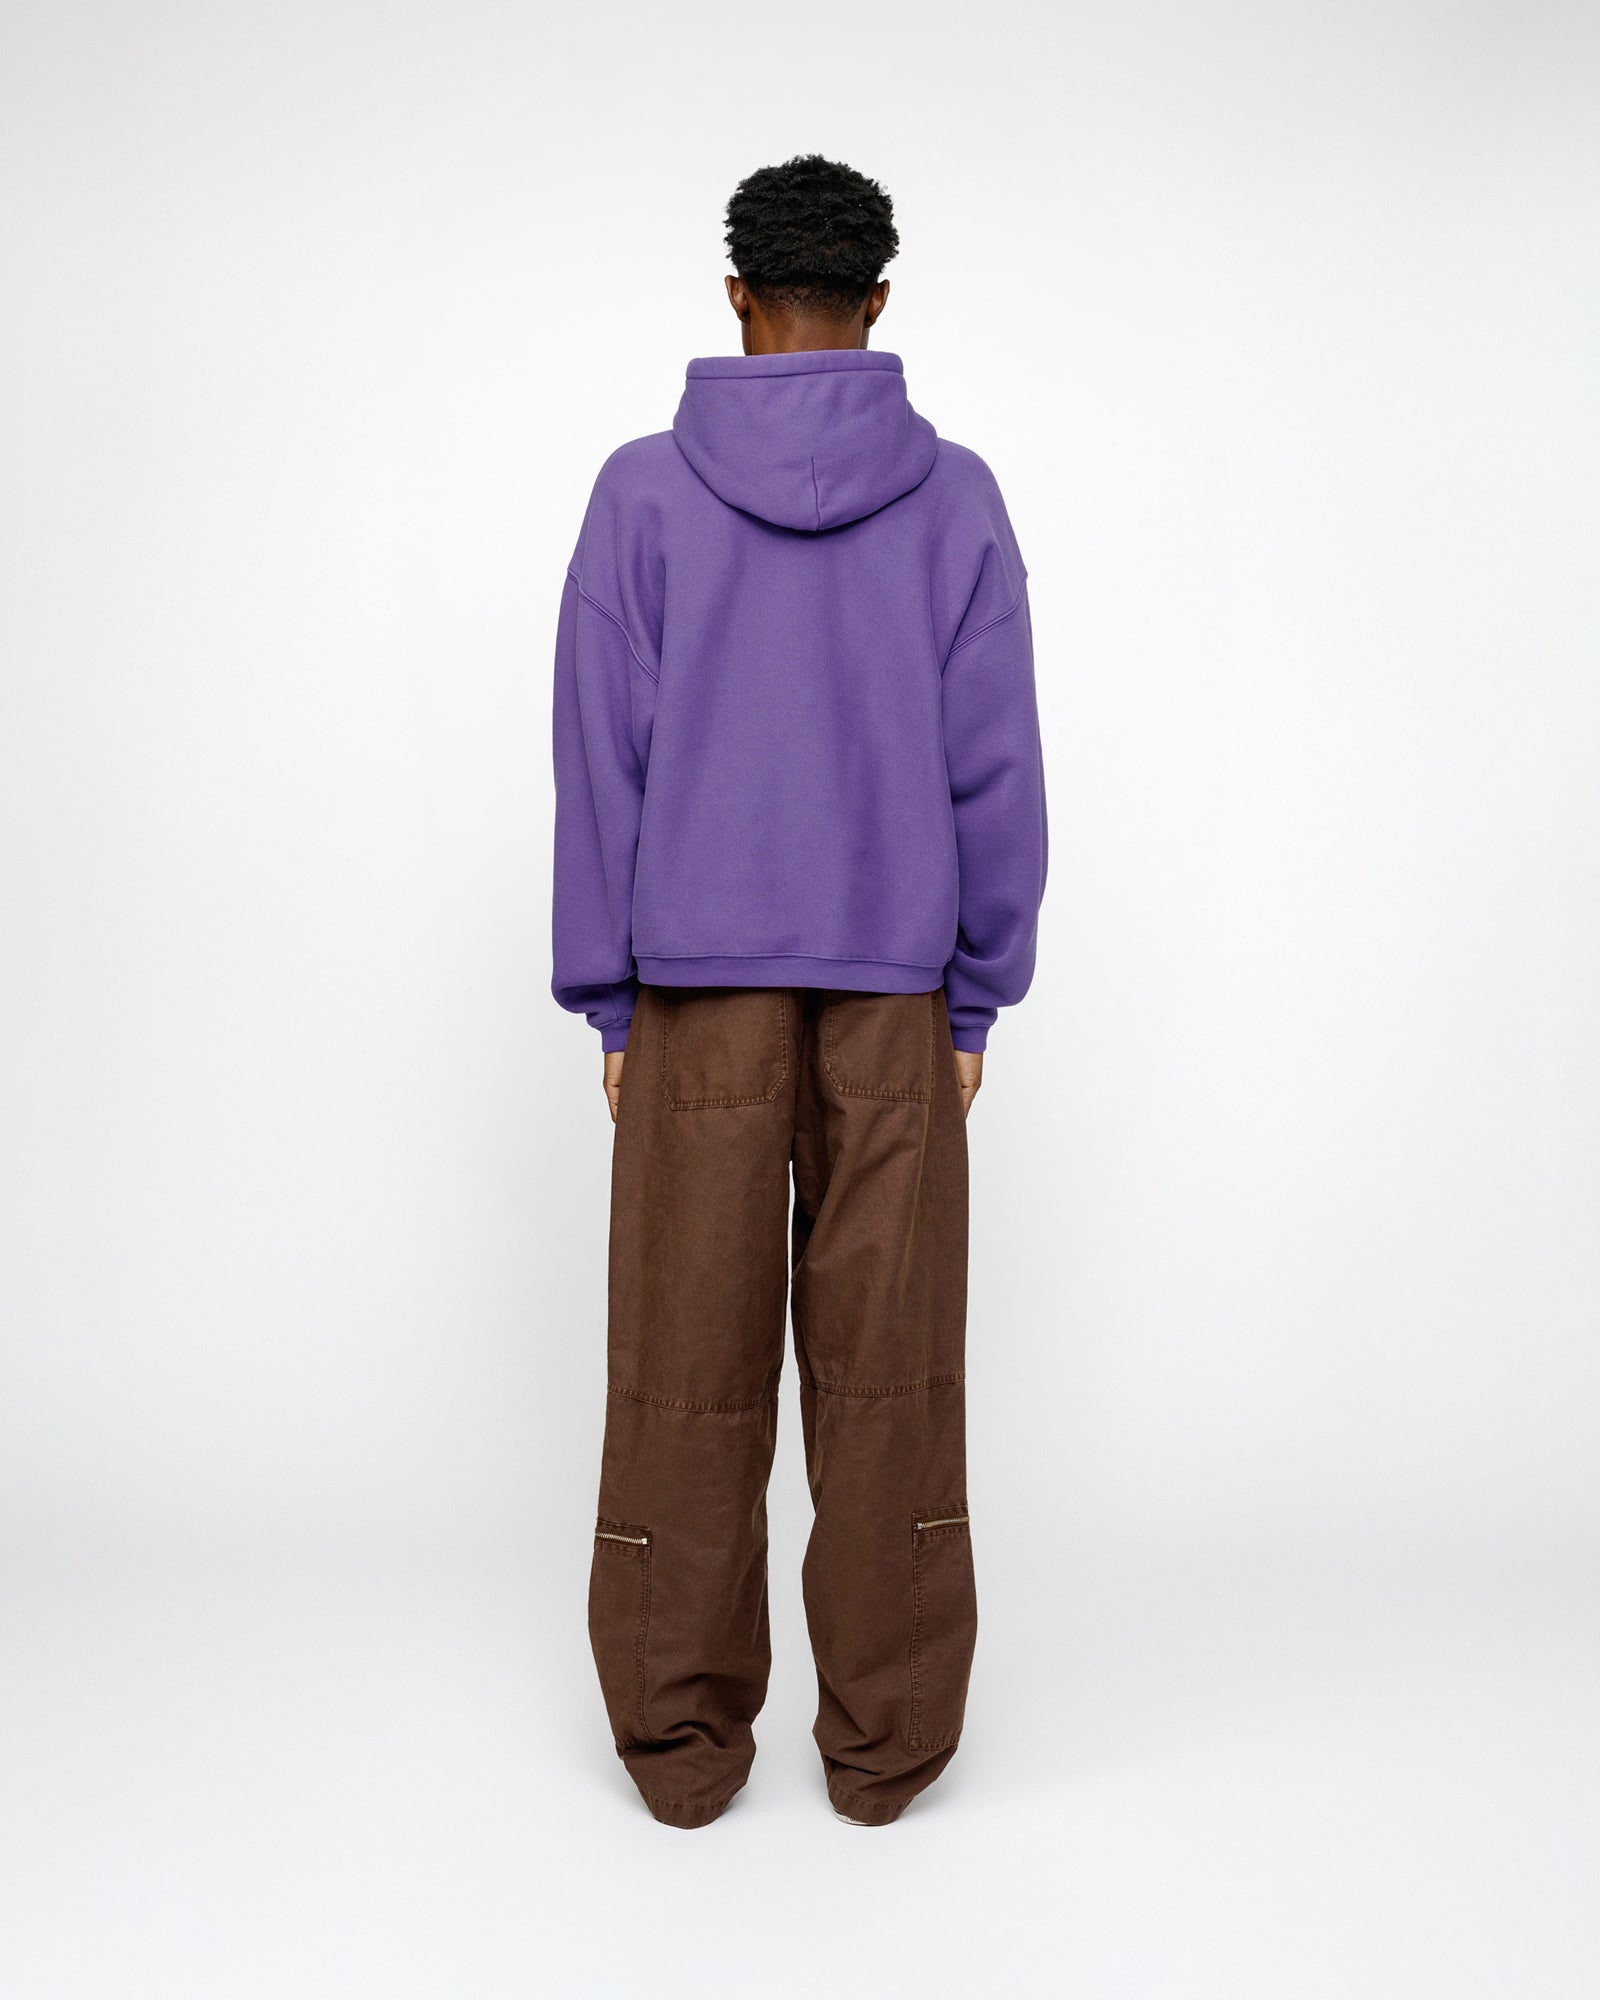 Stüssy Embroidered Relaxed Hoodie Purple Sweats